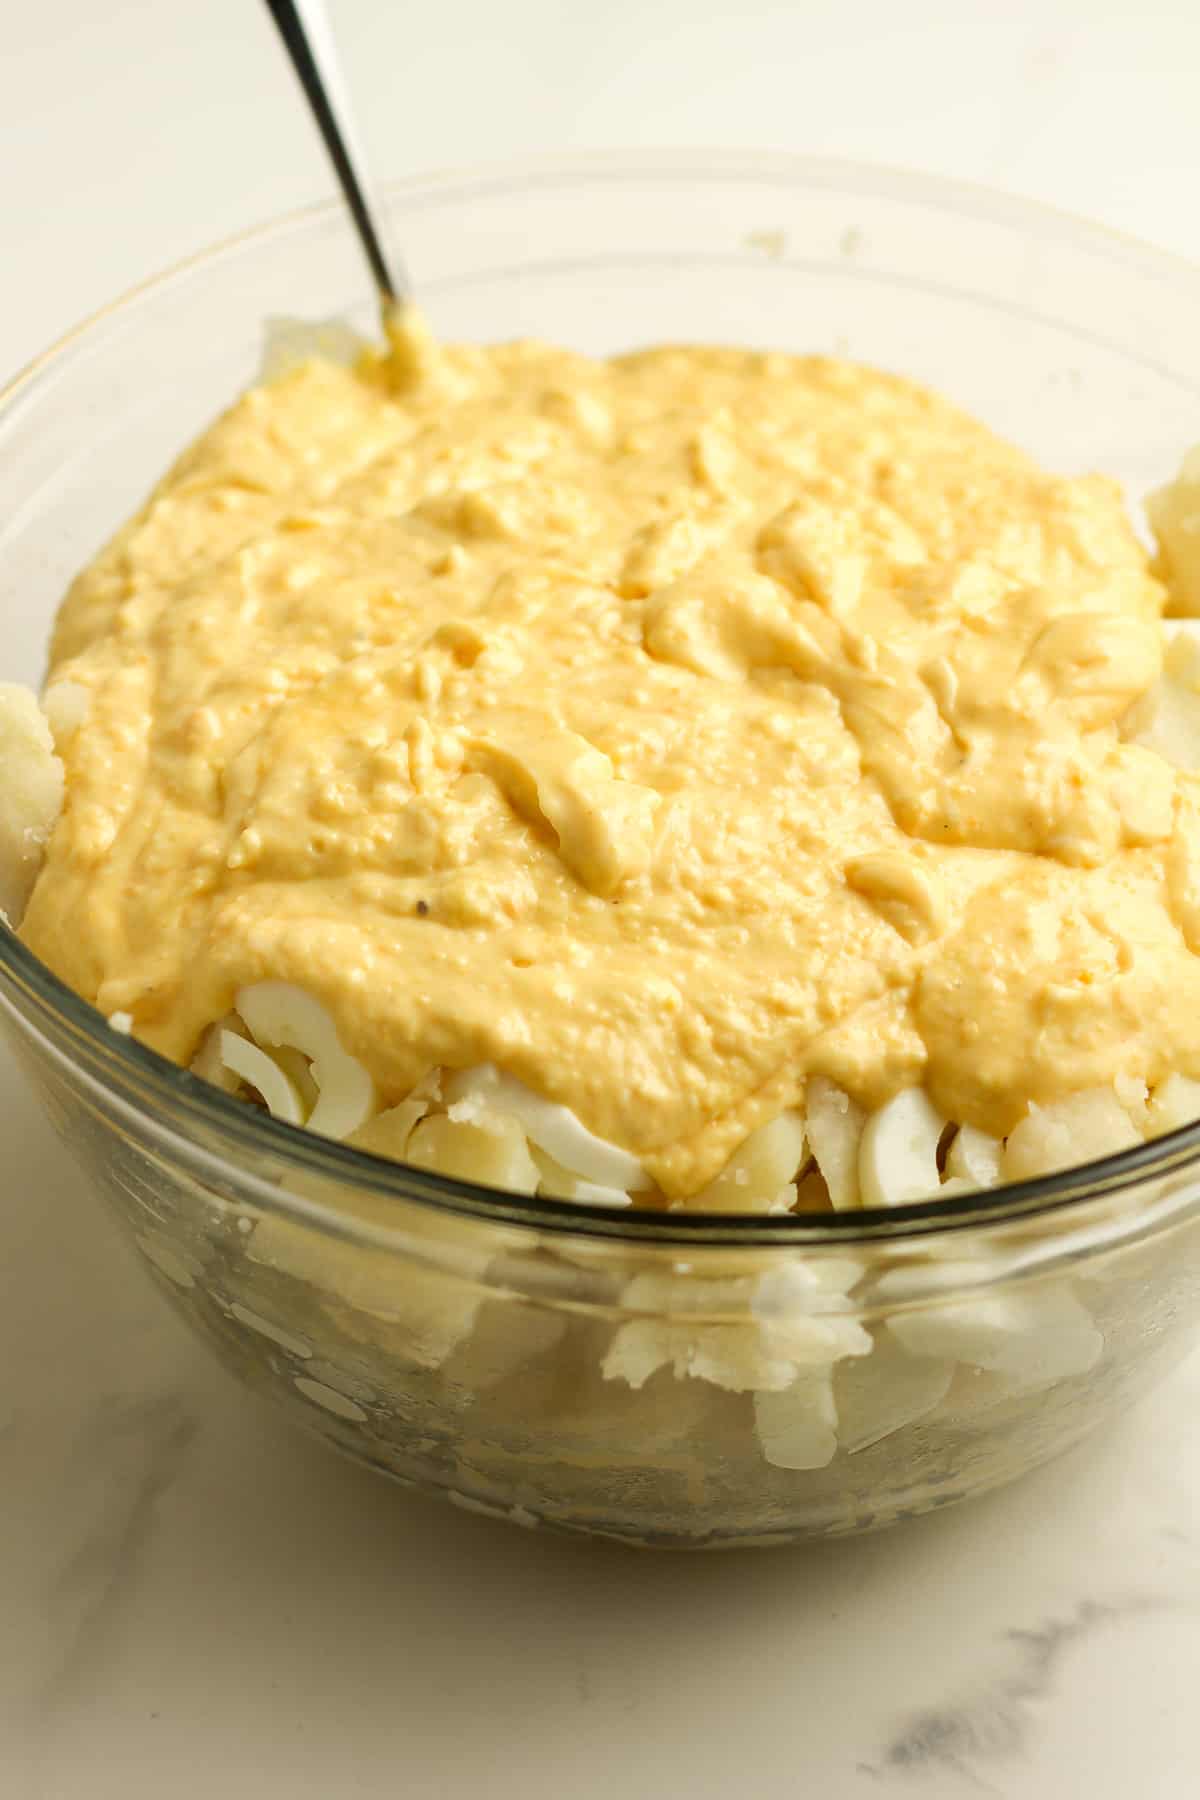 Side view of the potato salad before mixing together.